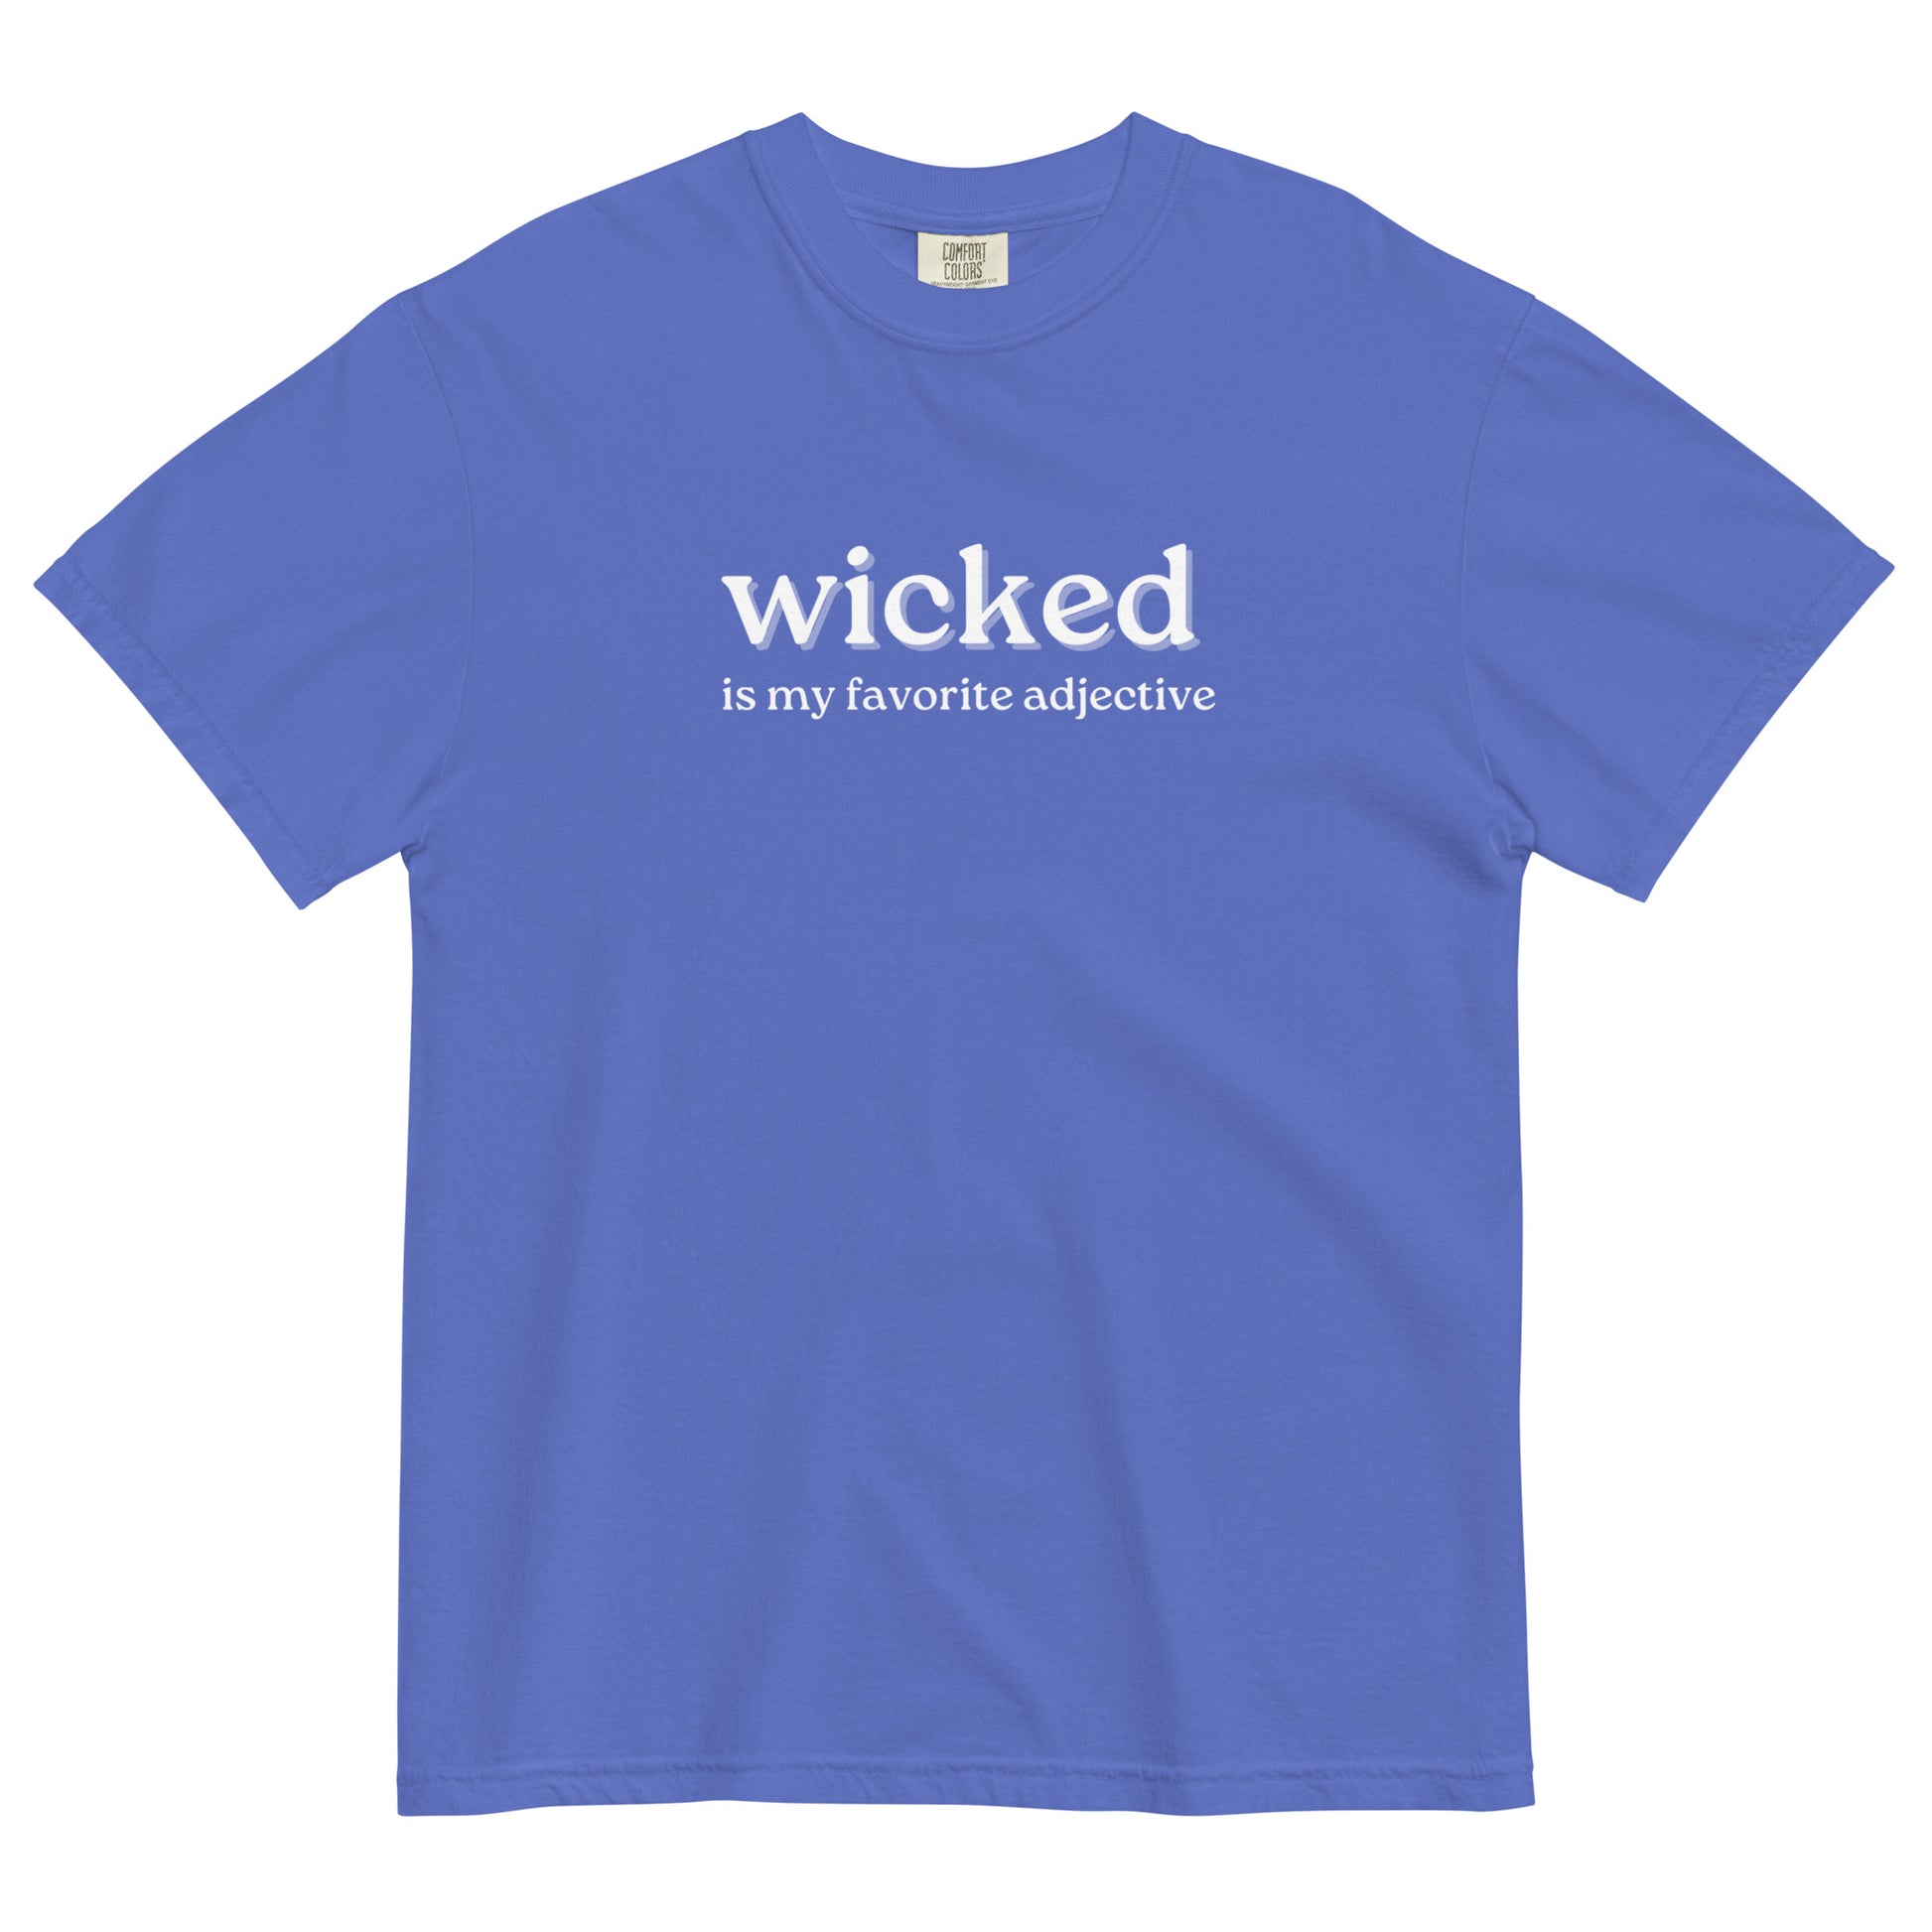 blue tshirt that says "wicked is my favorite adjective" in white lettering